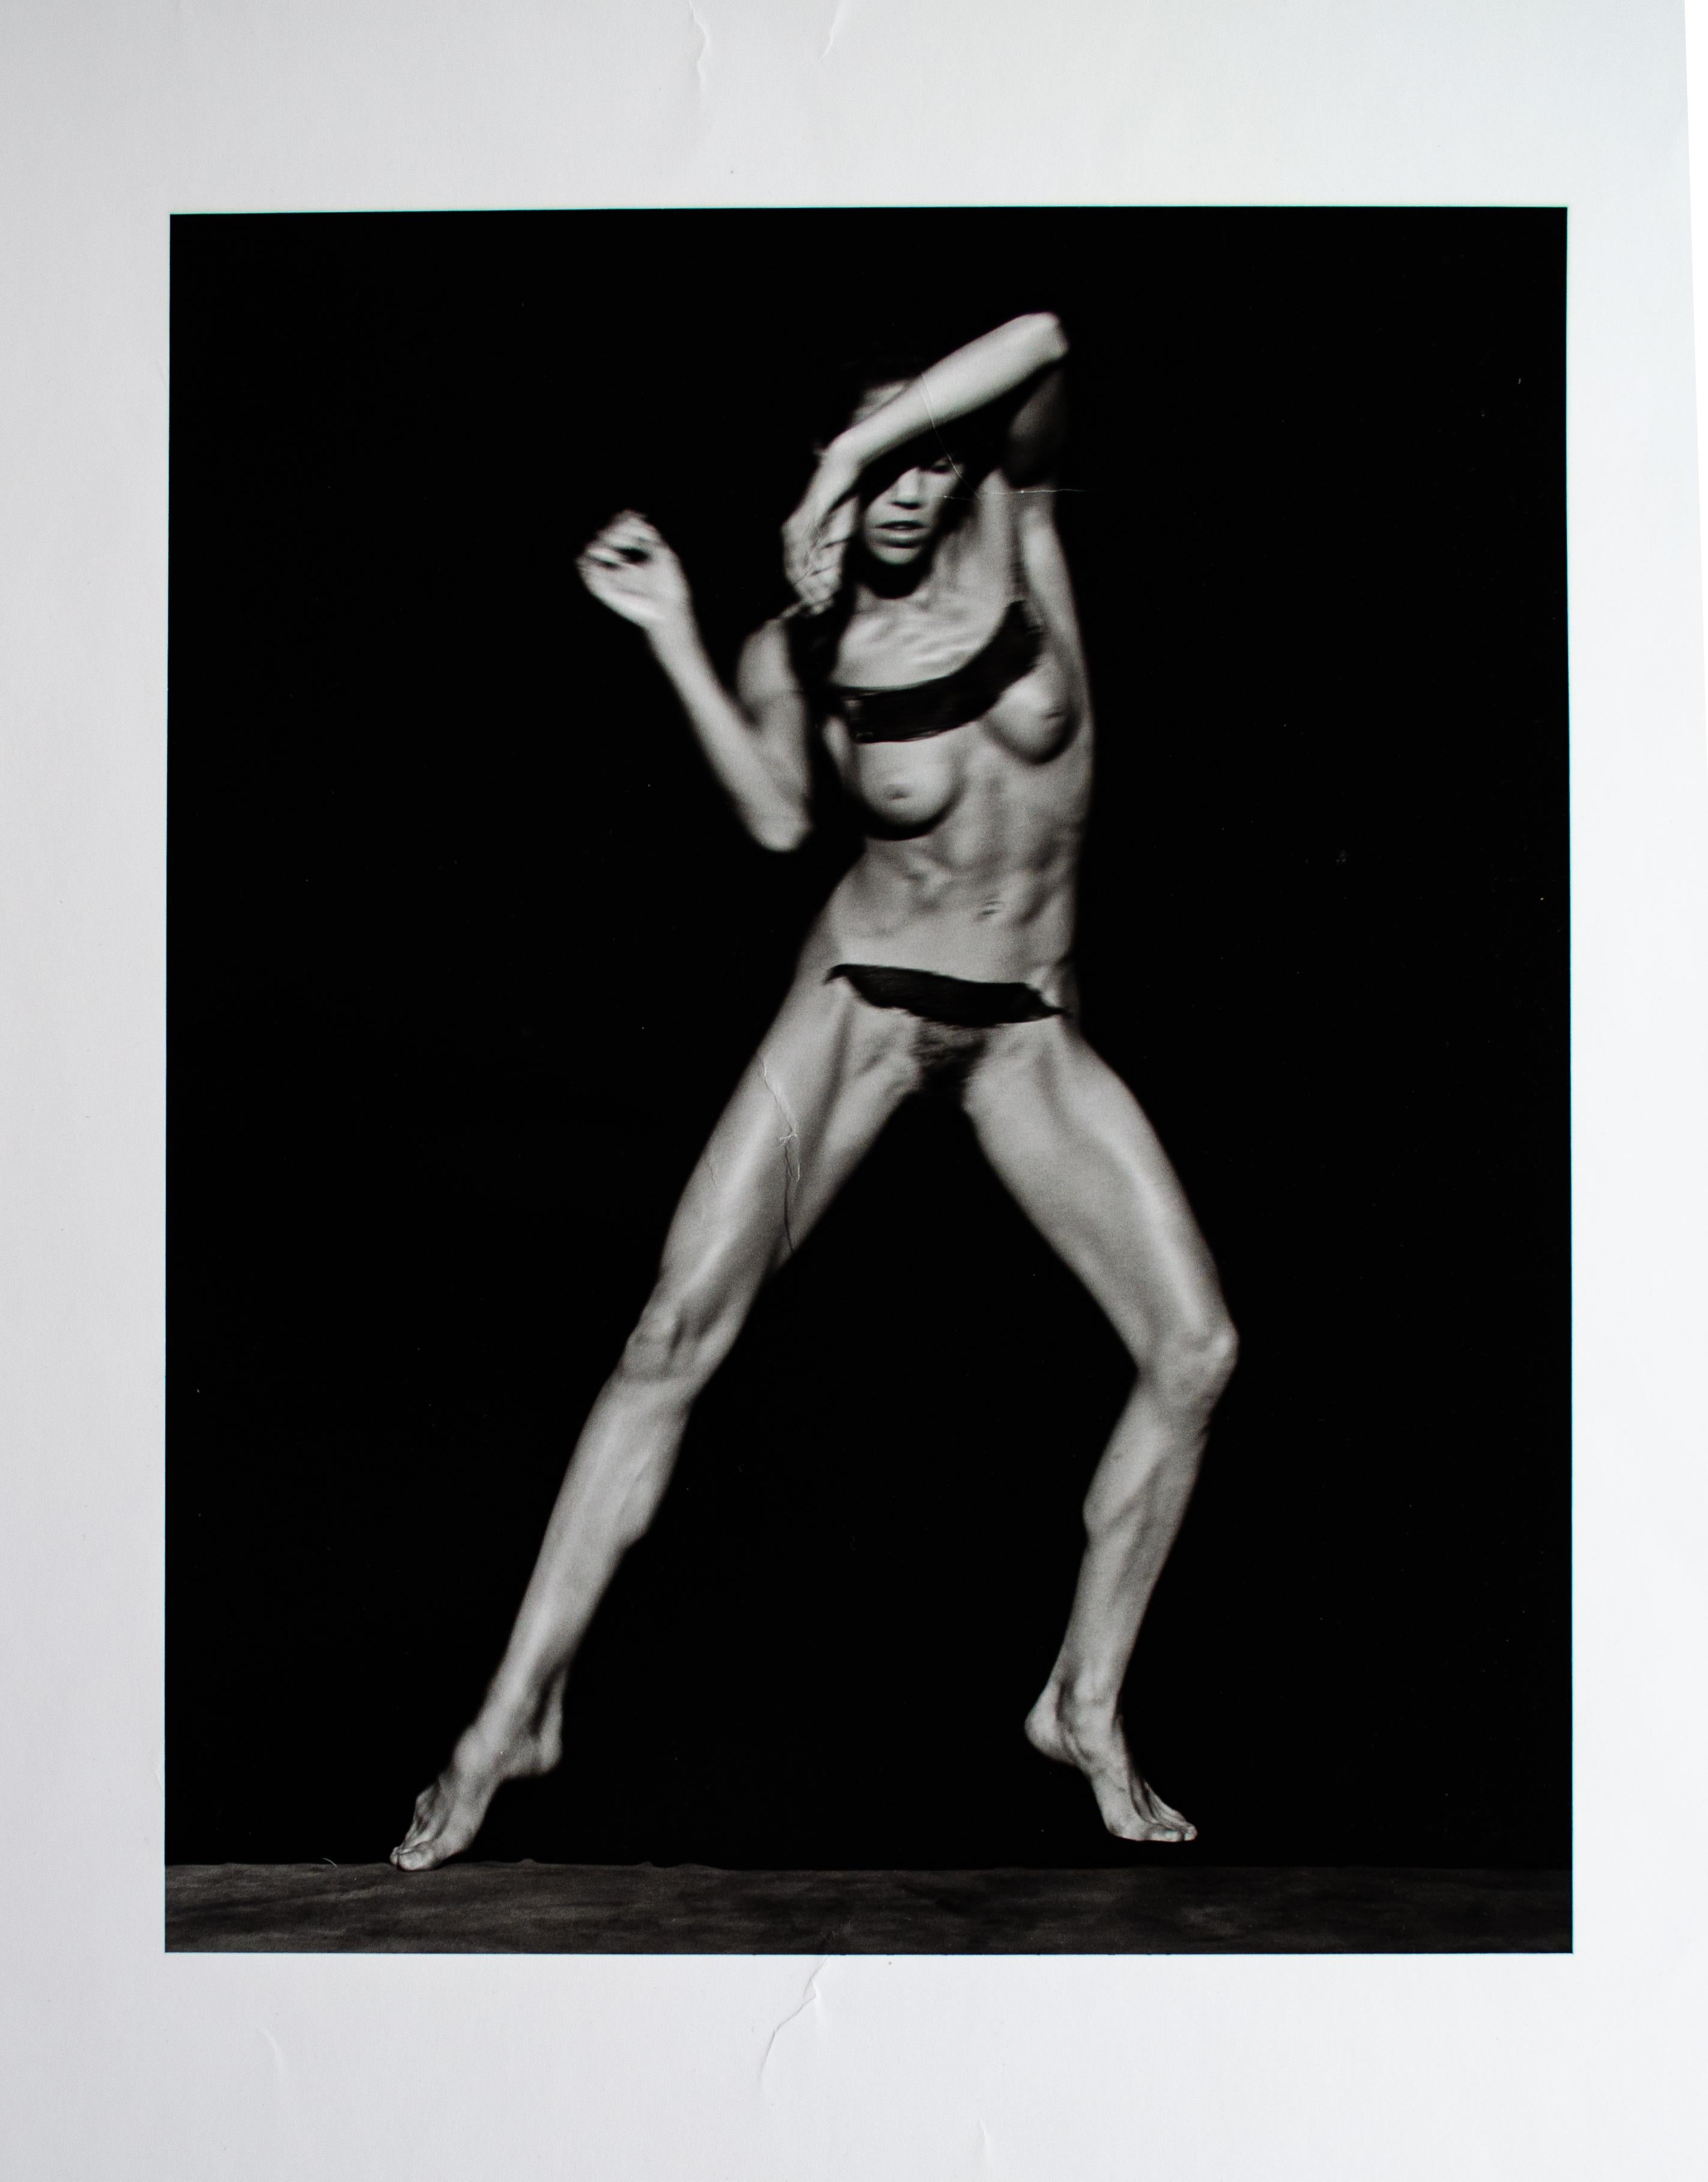 Mystery Artist
Untitled (Female Bodybuilder), c. 1980
Black and white photograph mounted to foam board
Image: 12 3/4 x 10 1/2 in.
Board: 19 7/8 x 16 1/2 in.